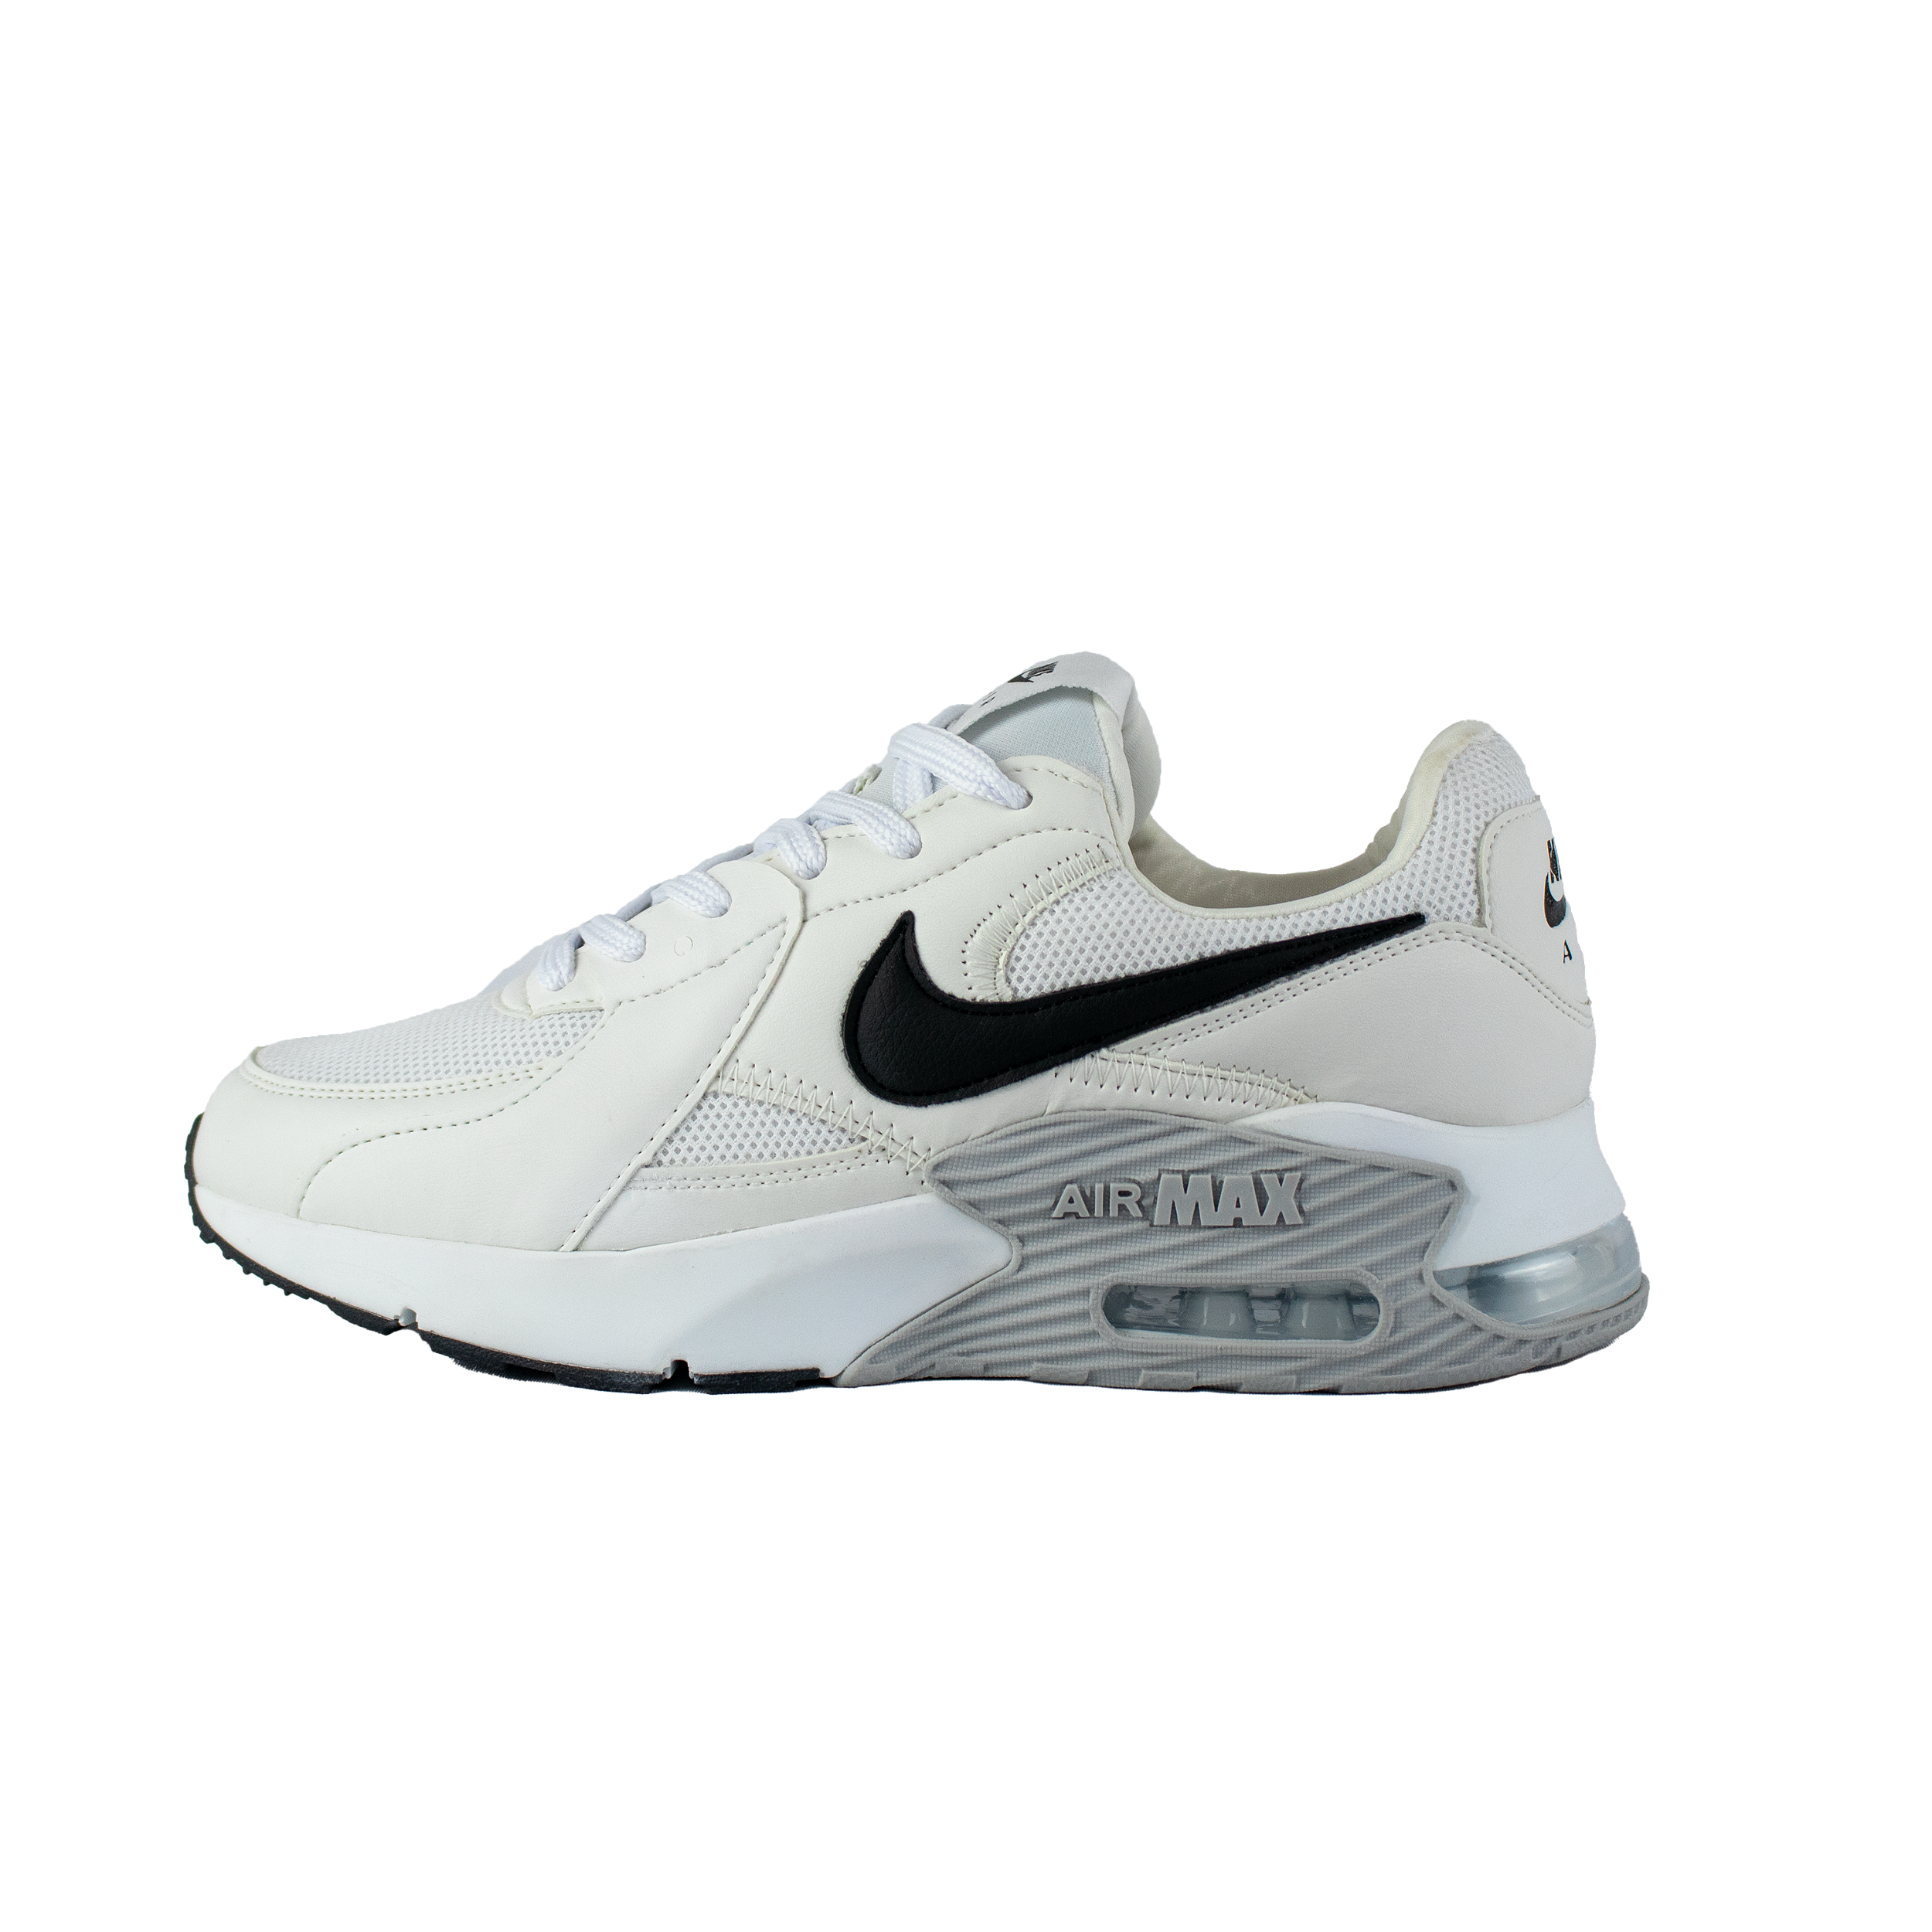 NIKE AIRMAX 90 EXCEE BRANCO/PRETO - After Wave